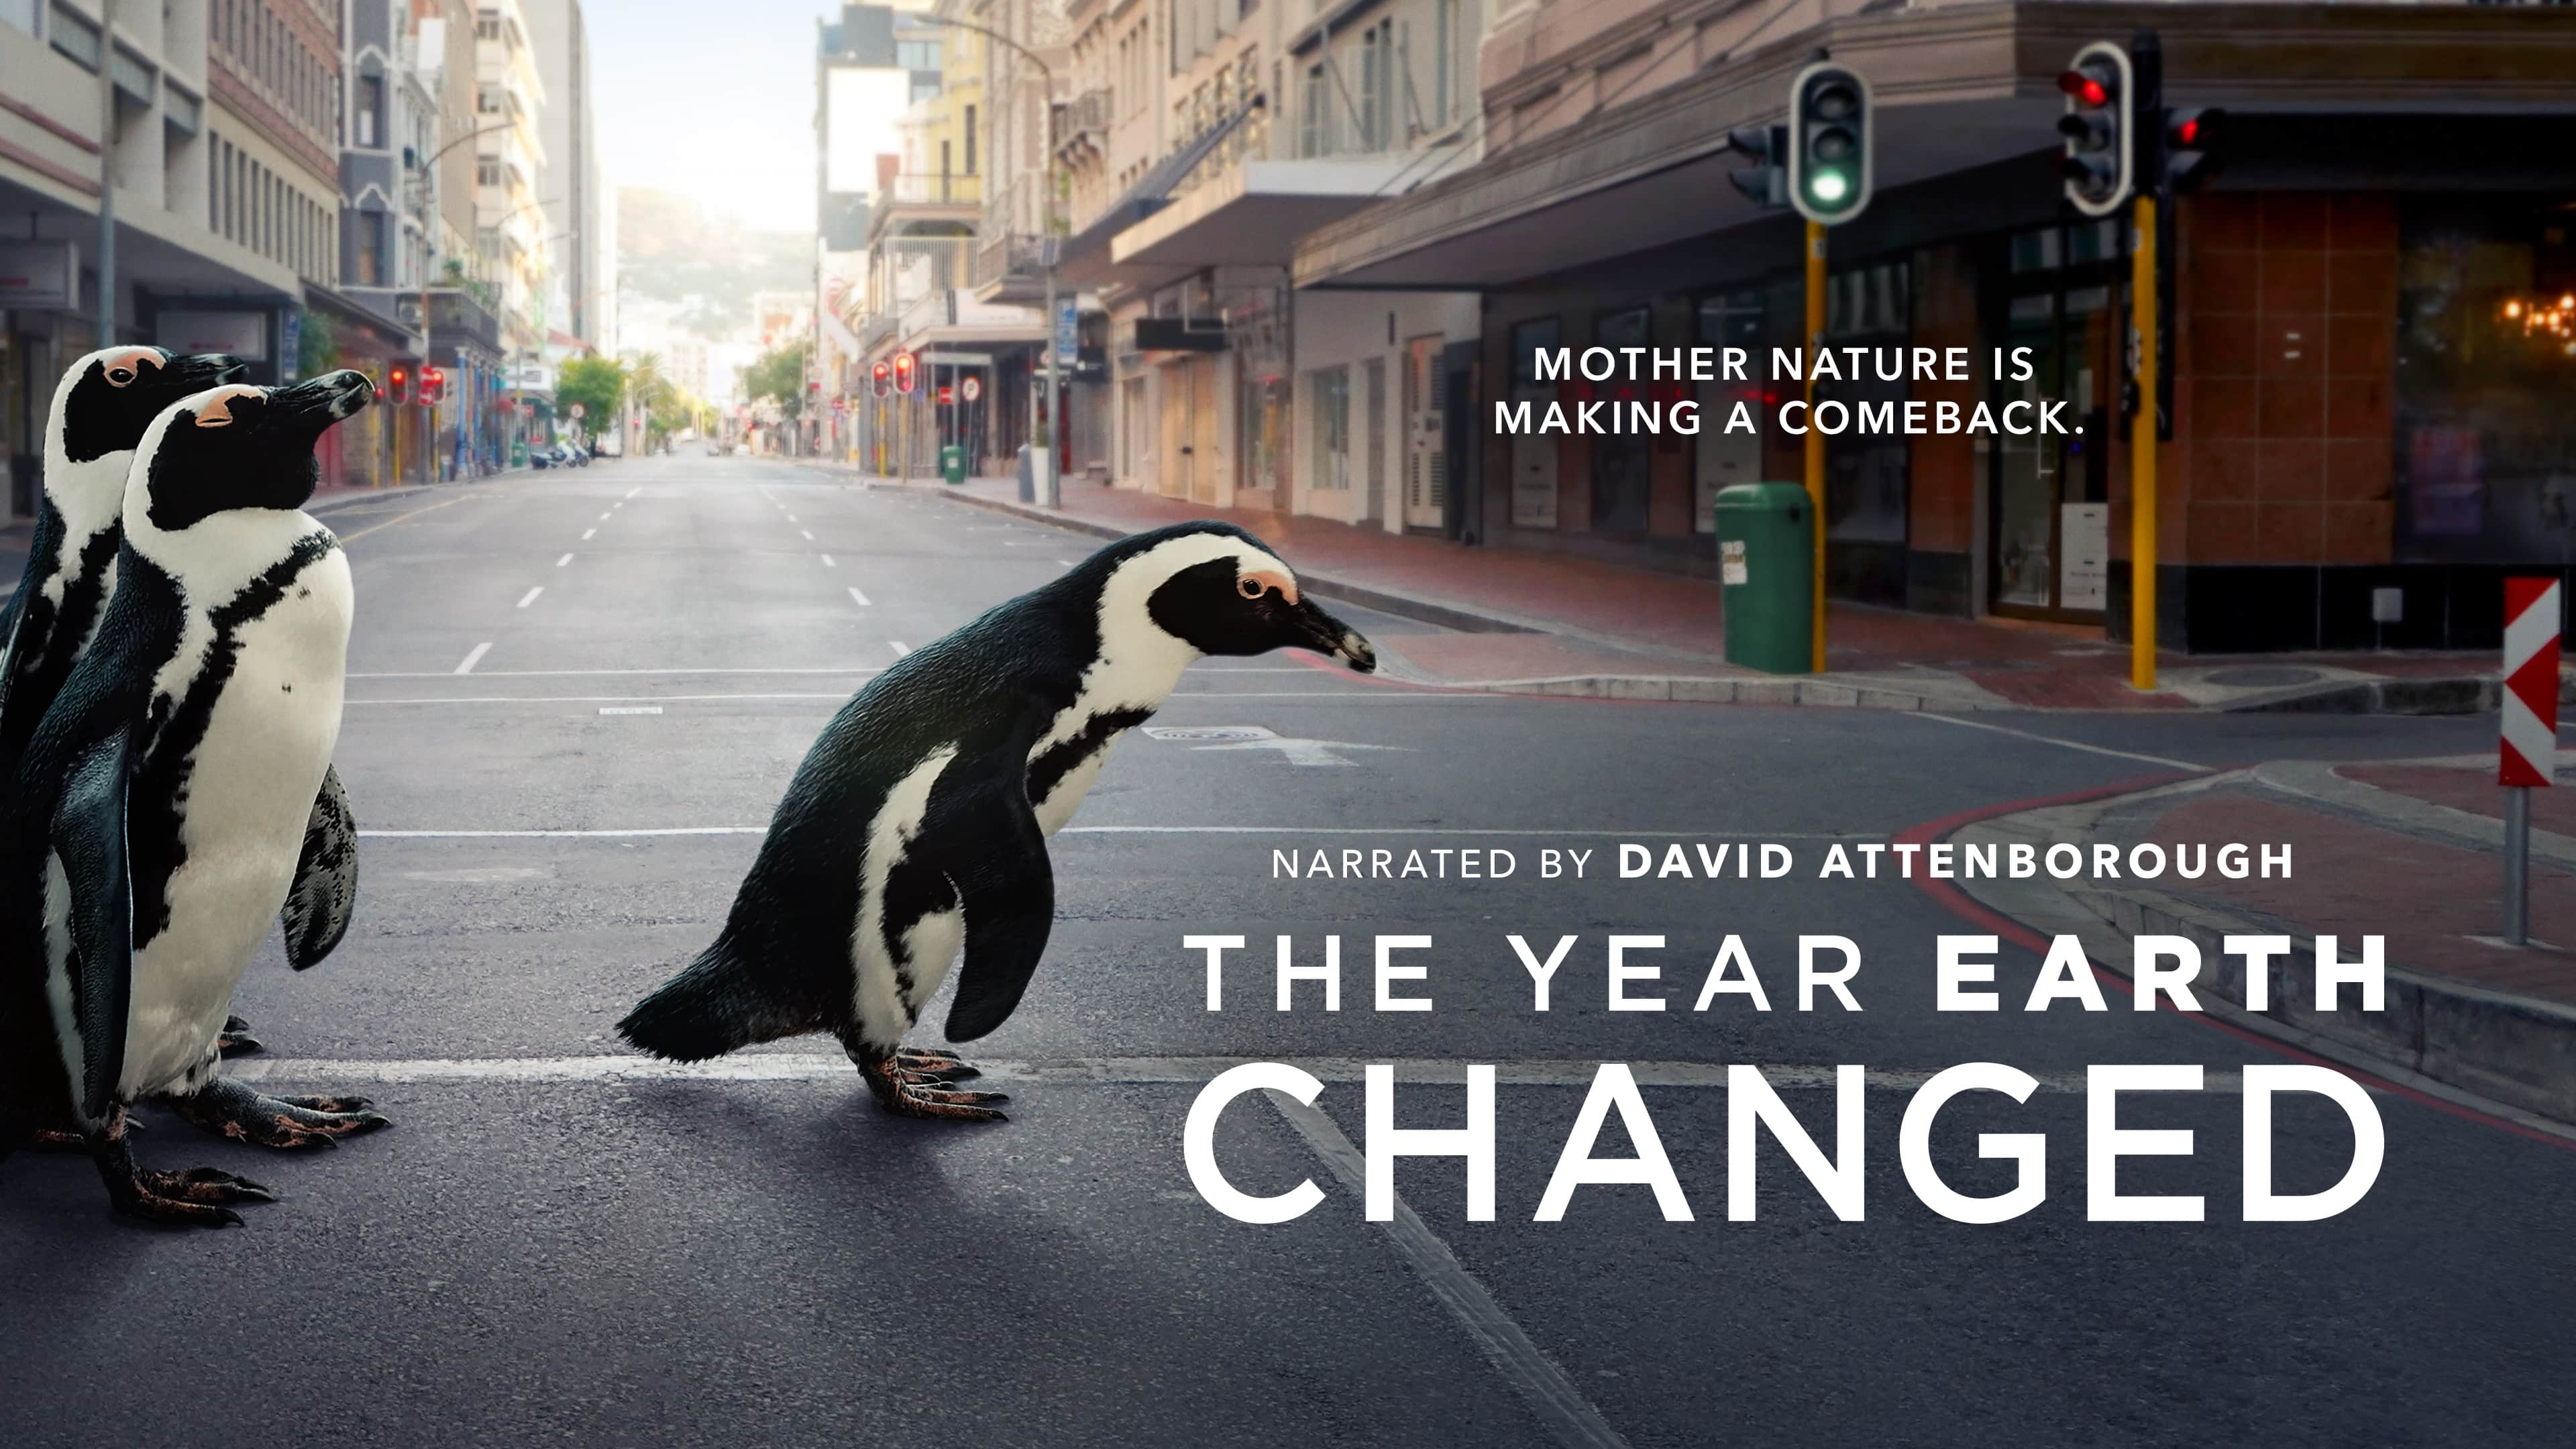 Penguins, too, fill us in on <em>The Year Earth Changed</em>.